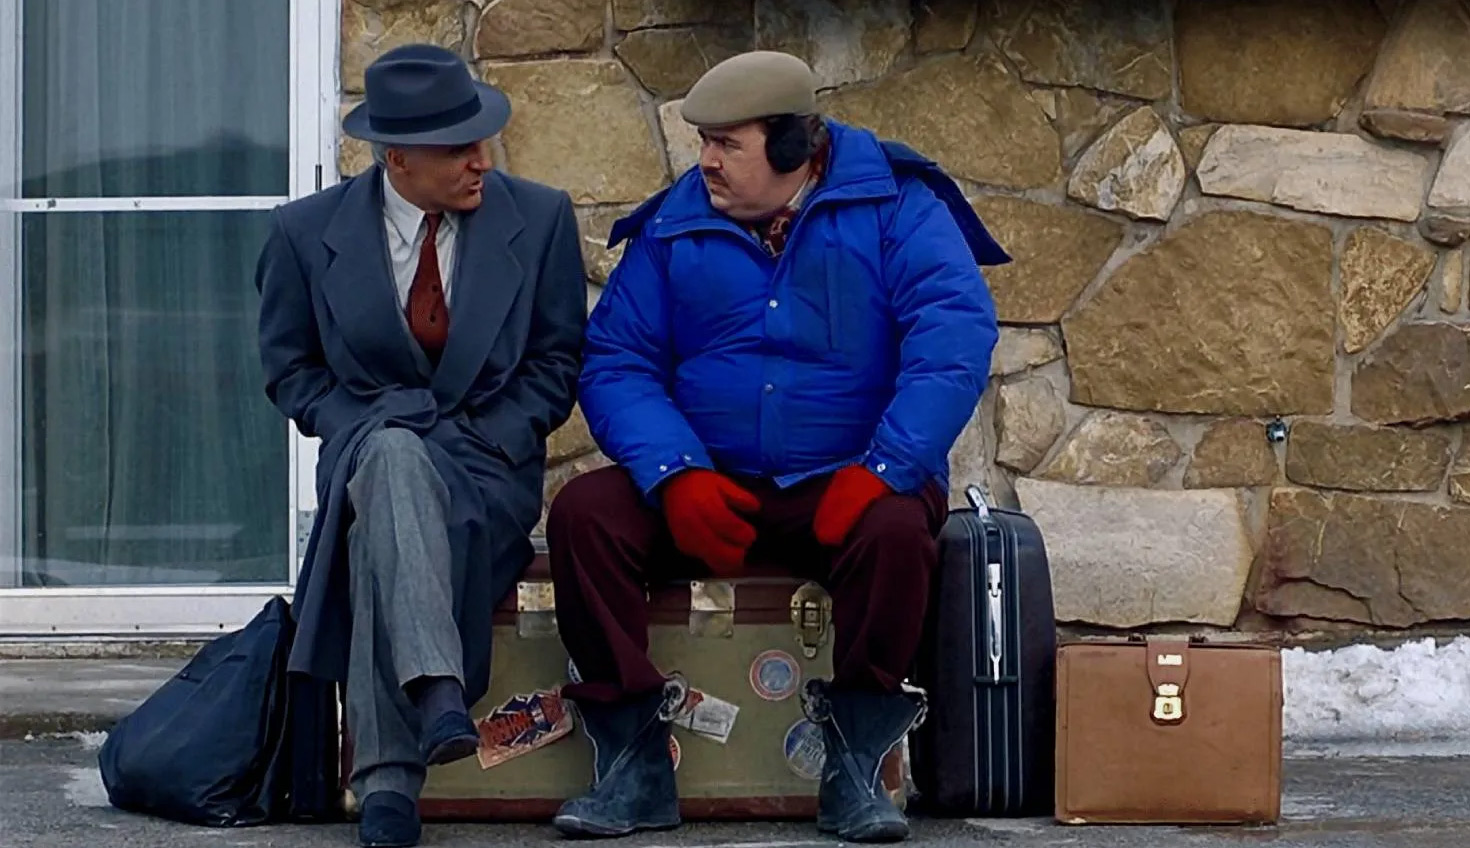 Steve Martin and John Candy in "Planes, Trains and Automobiles"